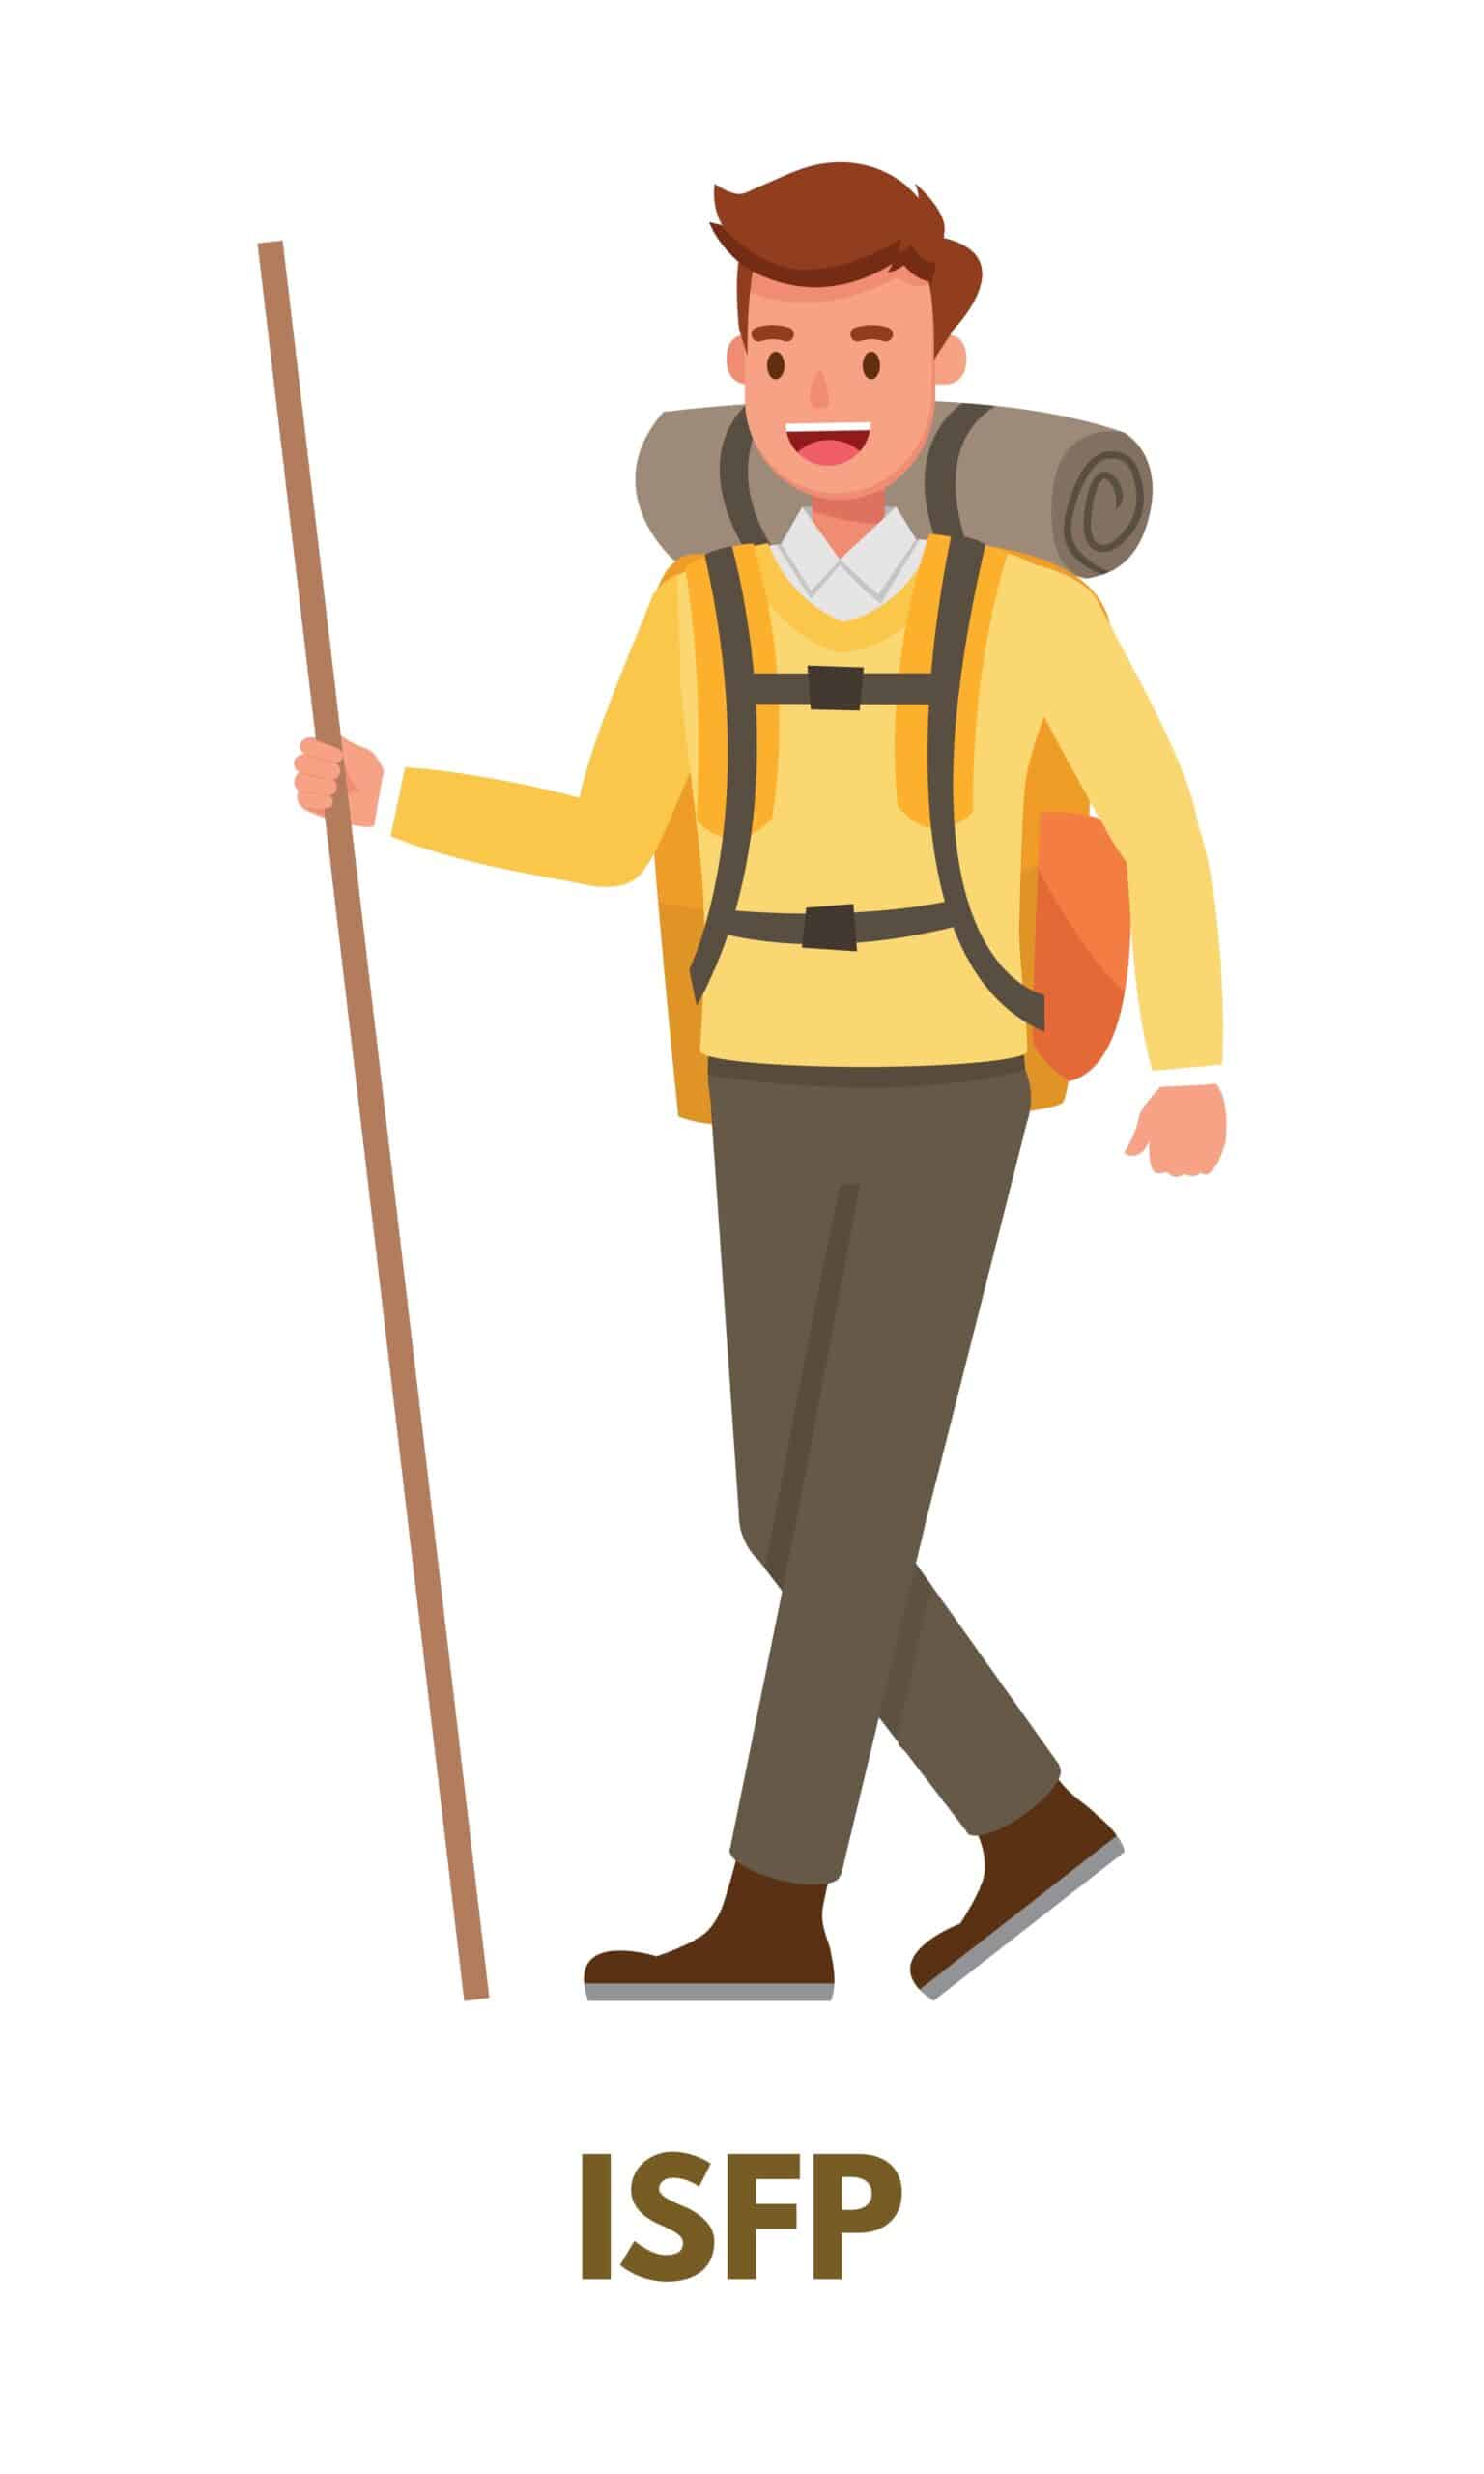 Adventurer,Man,In,Yellow,Clothing,With,A,Backpack,And,Stick